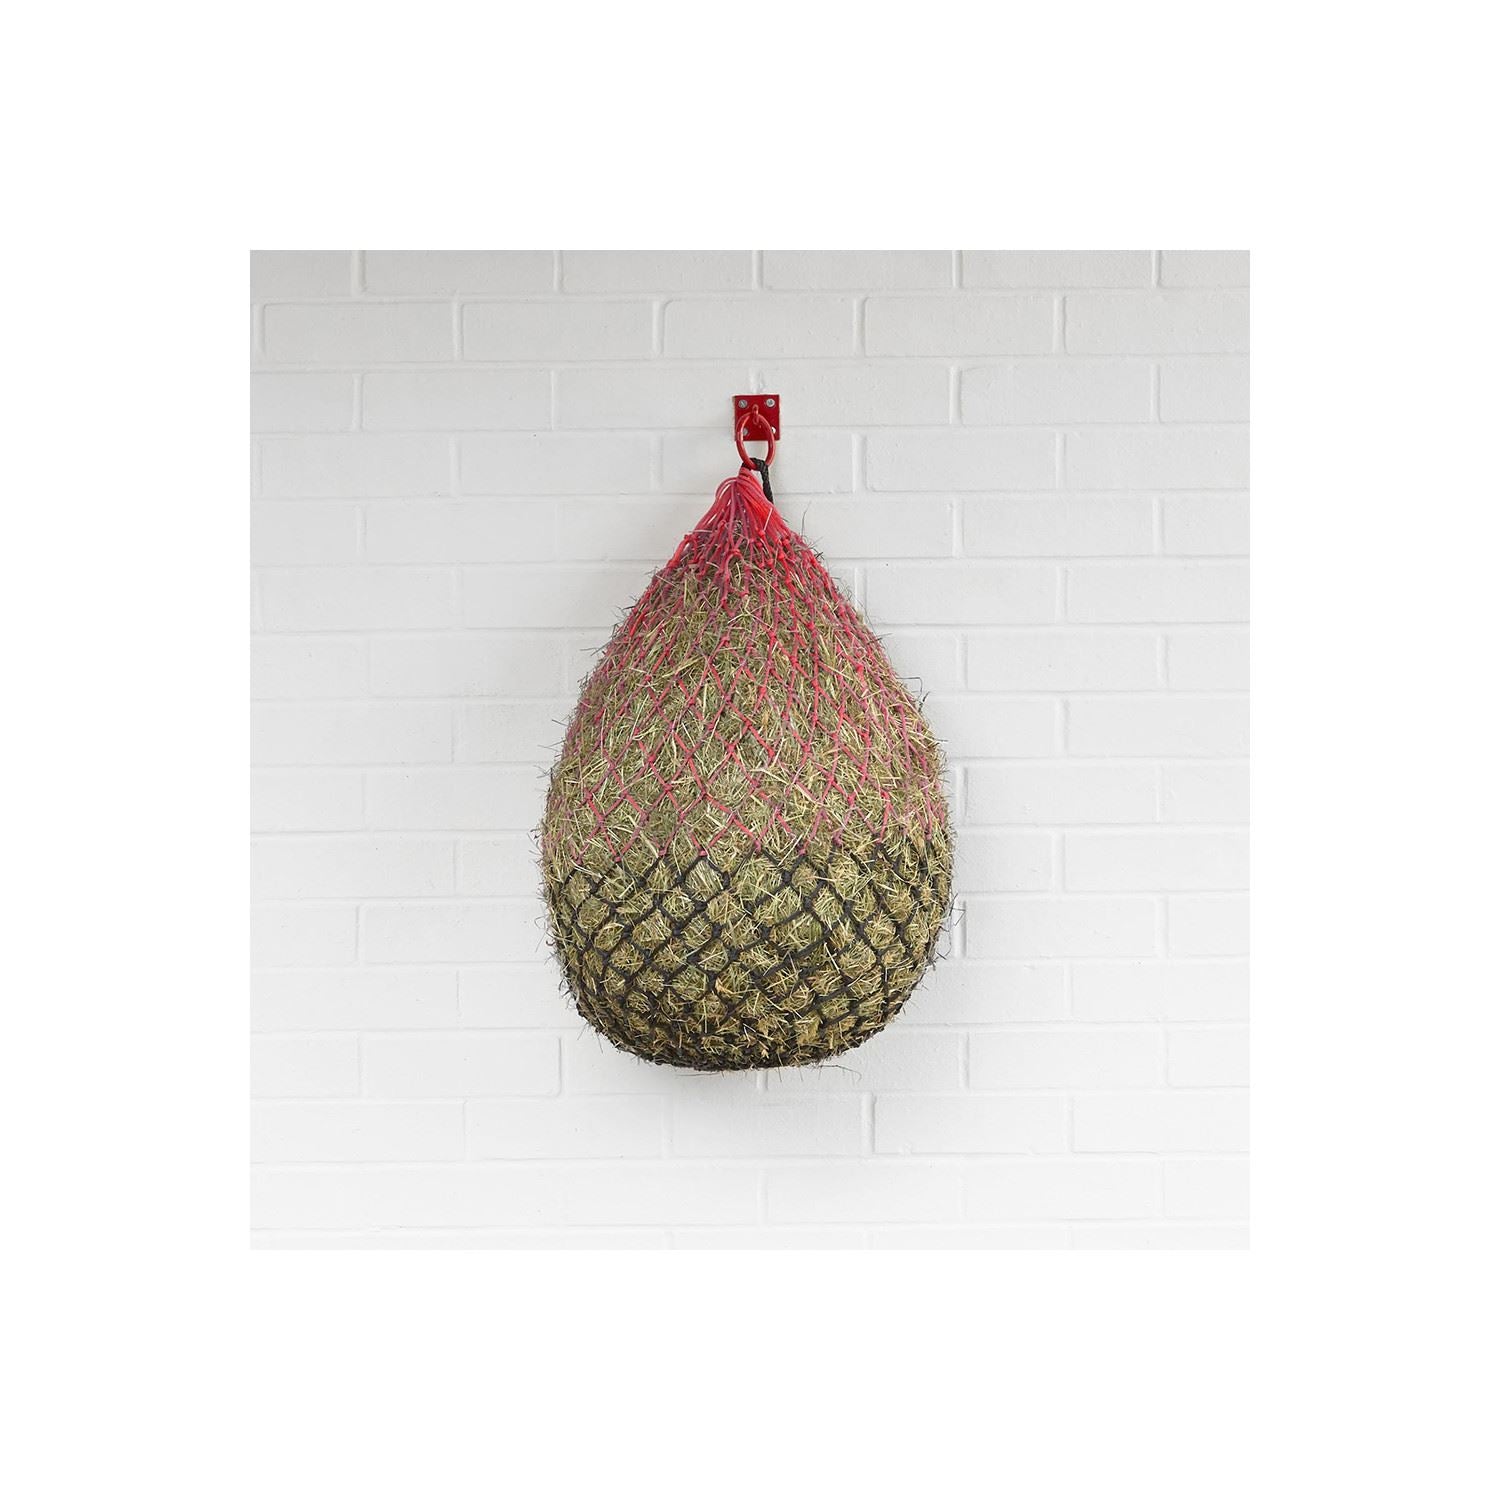 Perry Equestrian 30 Drip Feed Easy Tie Polypropylene Hay/Haylage Net - Small 4.0Kg capacity" - Just Horse Riders